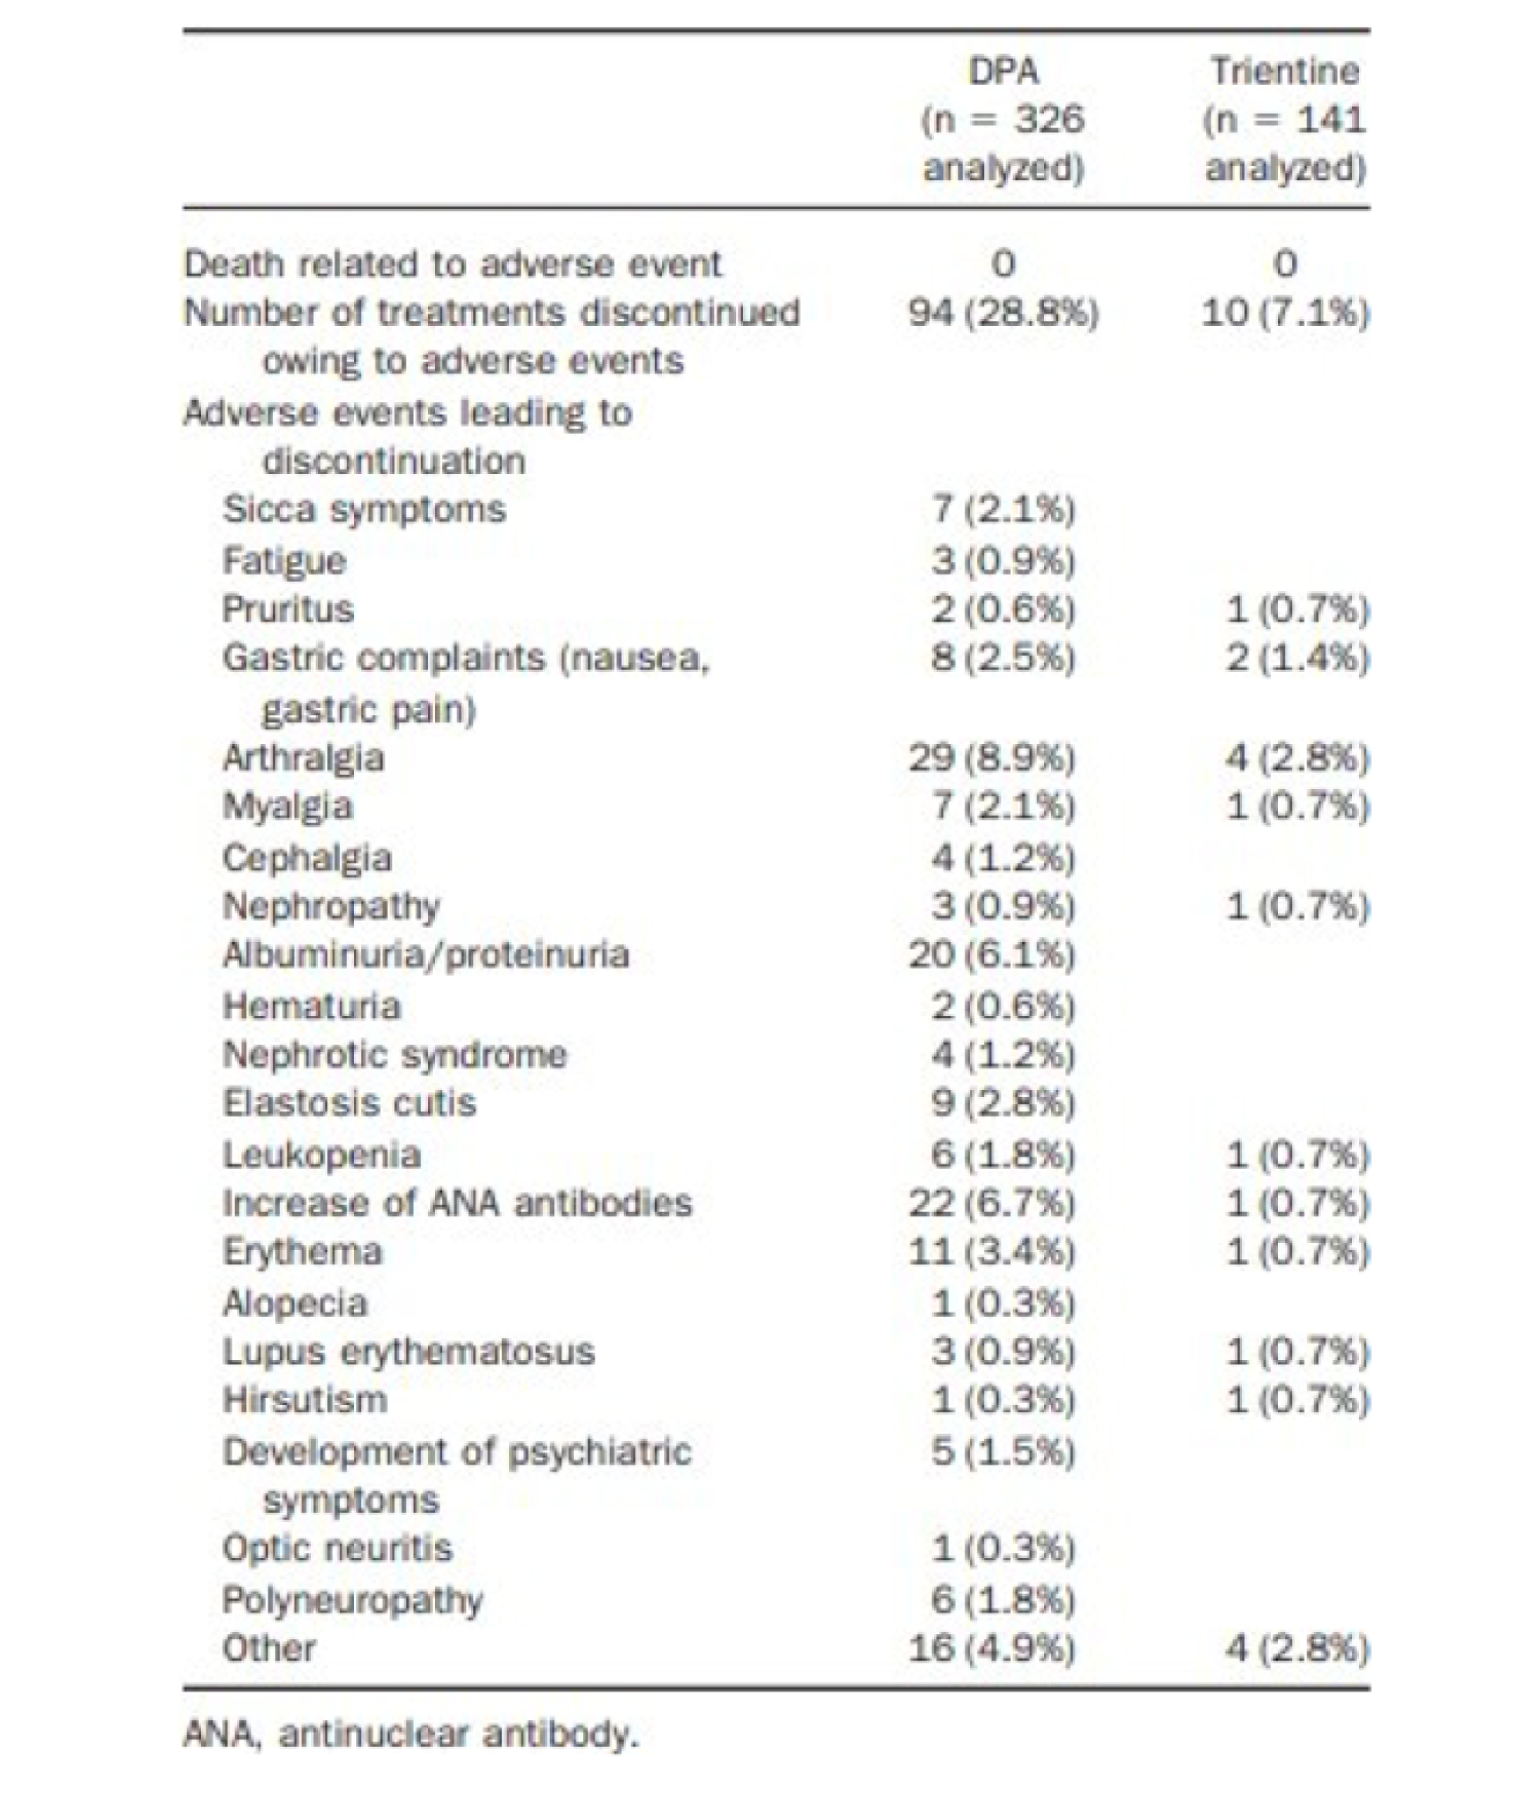 This is a table of the harms reported in the study.